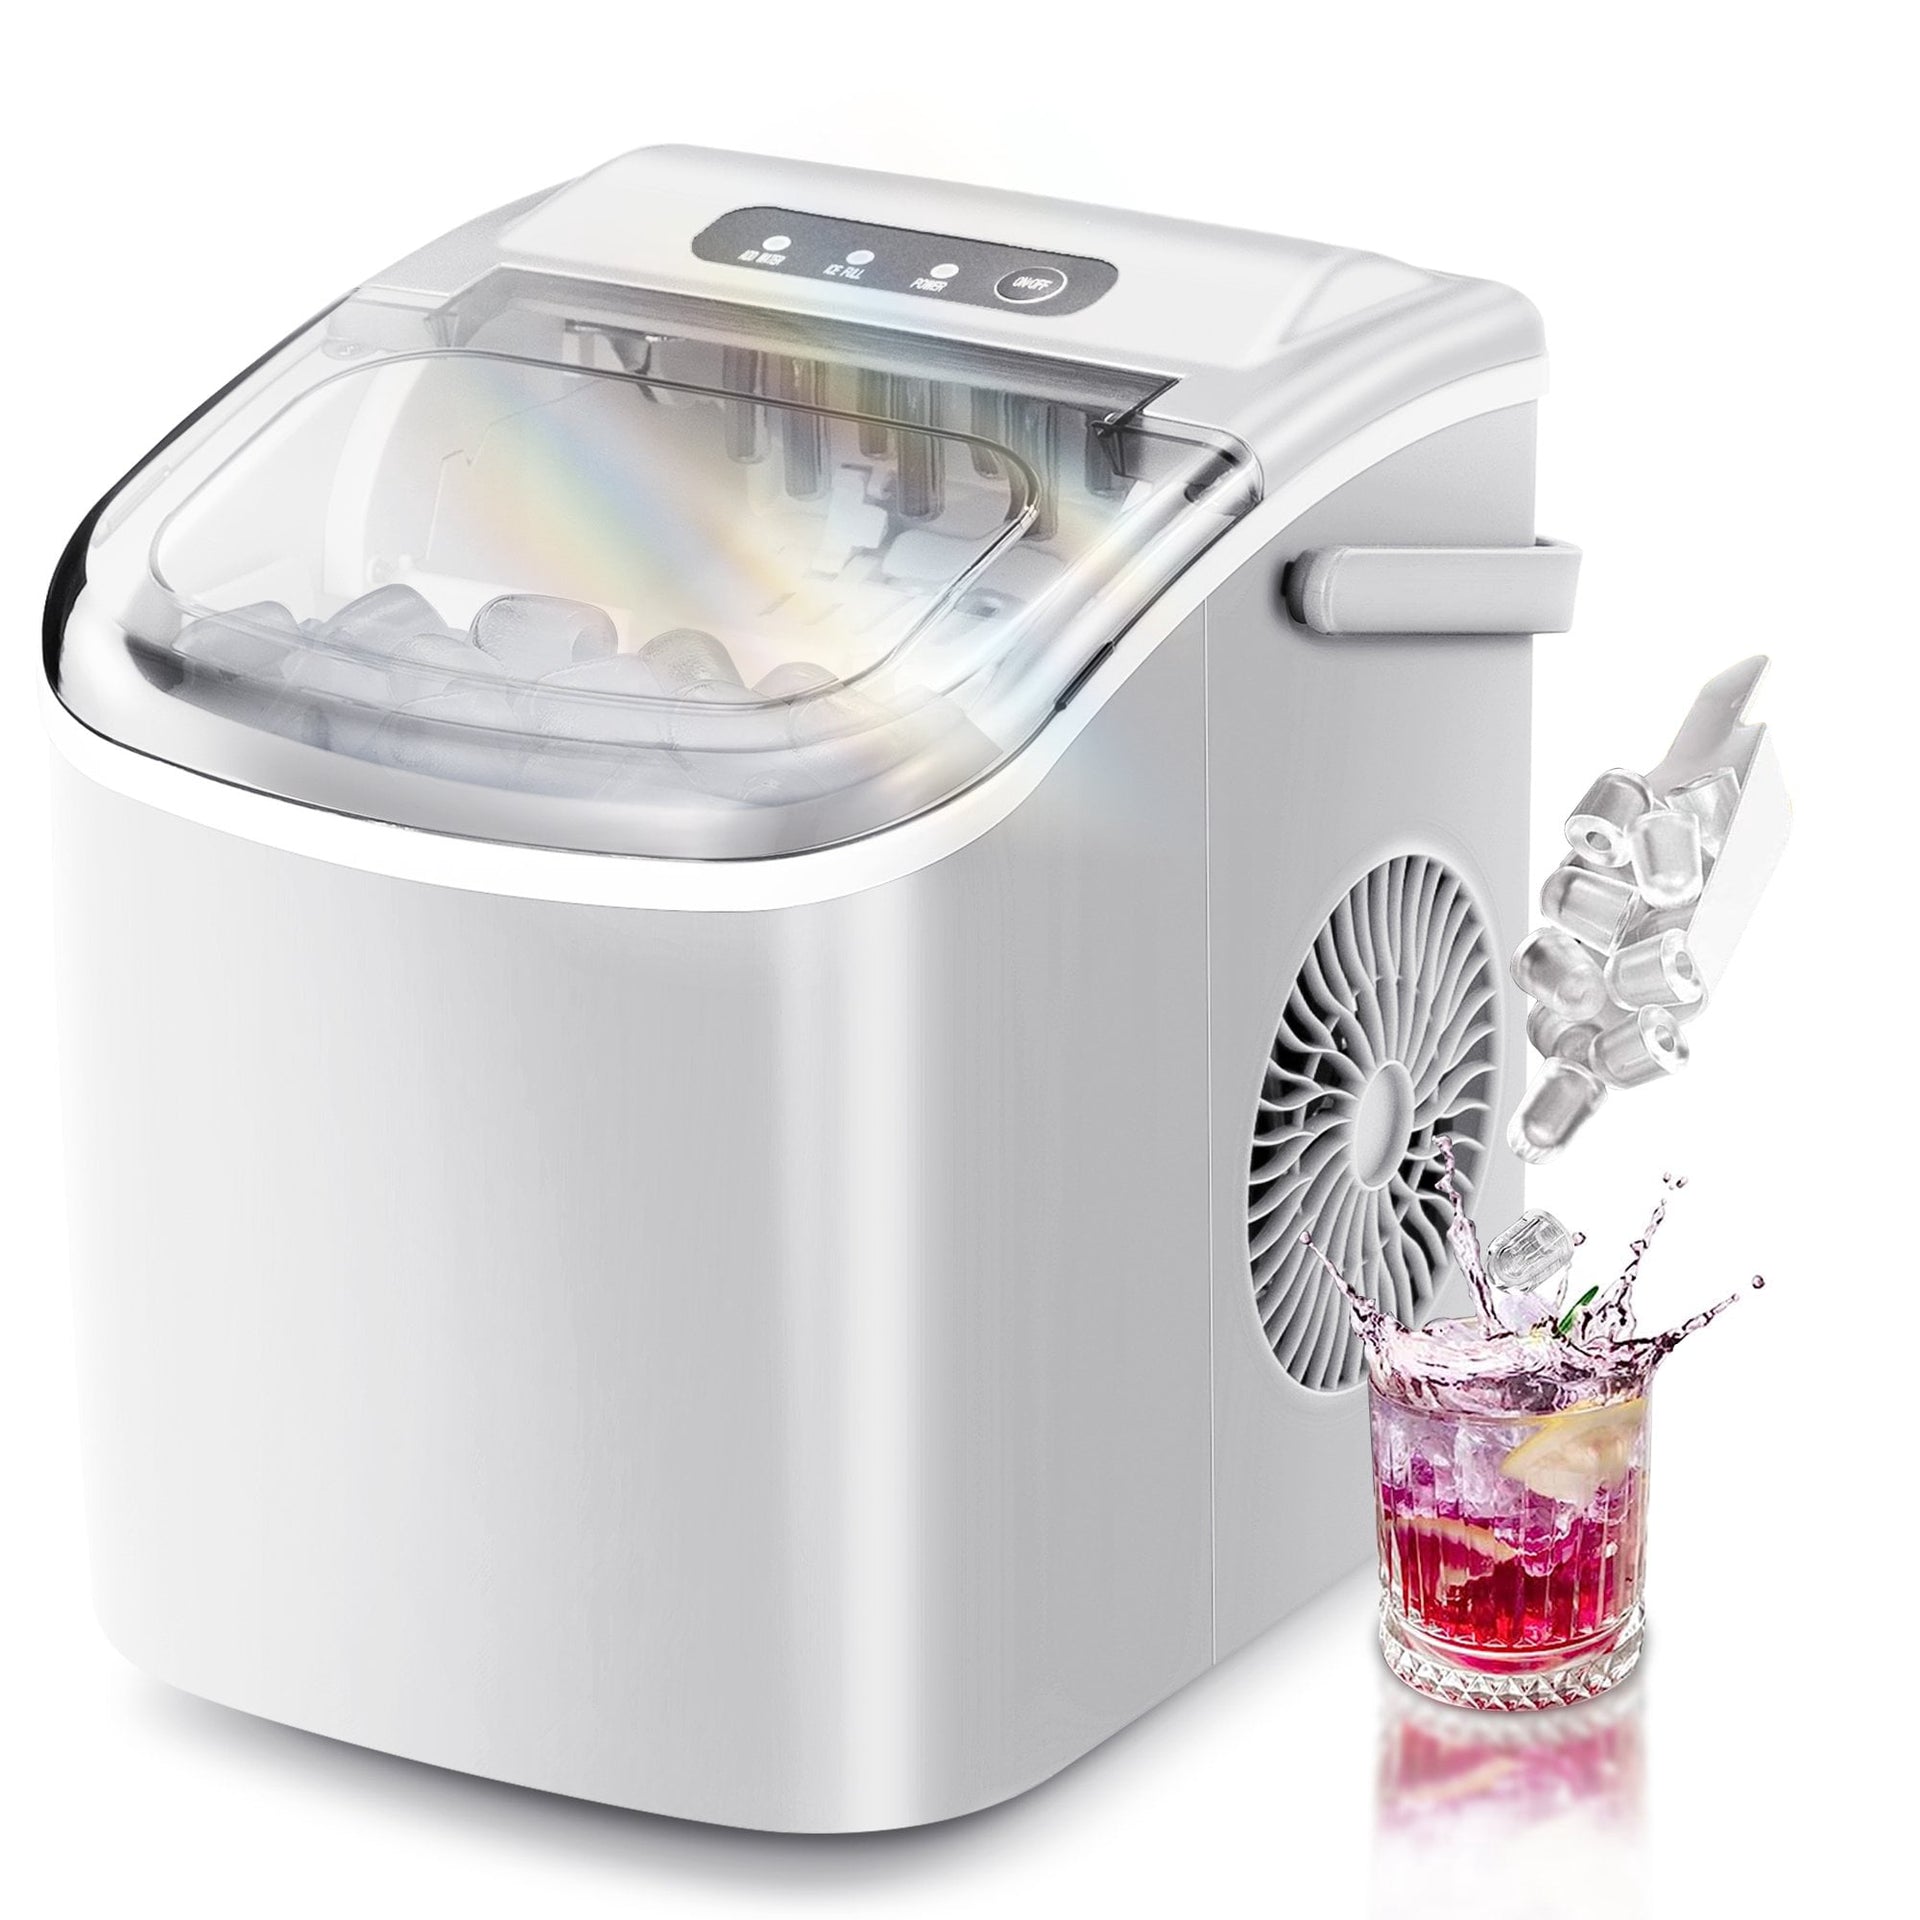 https://lhrivershop.com/cdn/shop/files/LHRIVER-Countertop-Ice-Maker-Portable-Ice-Machine-with-Handle-Self-Cleaning-Ice-Makers-26Lbs-24H-9-Ice-Cubes-Ready-in-6-Mins-White_373f7a9b-d4d6-471b-bd13-0009122f1a9b.b74a5fae18ffb9e.jpg?v=1697162167&width=1920